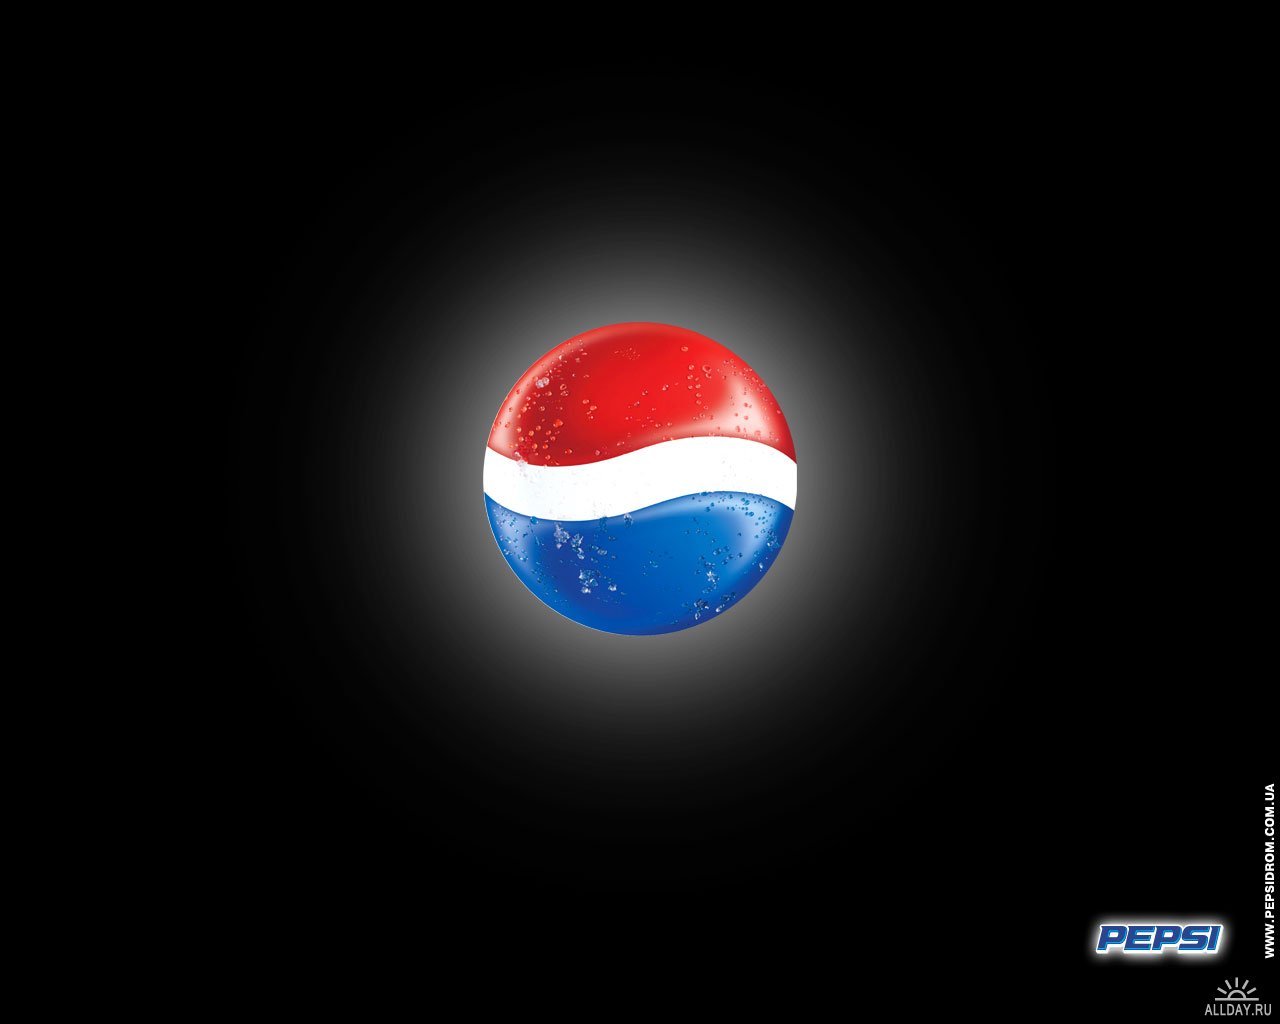 Popular Pepsi images for mobile phone